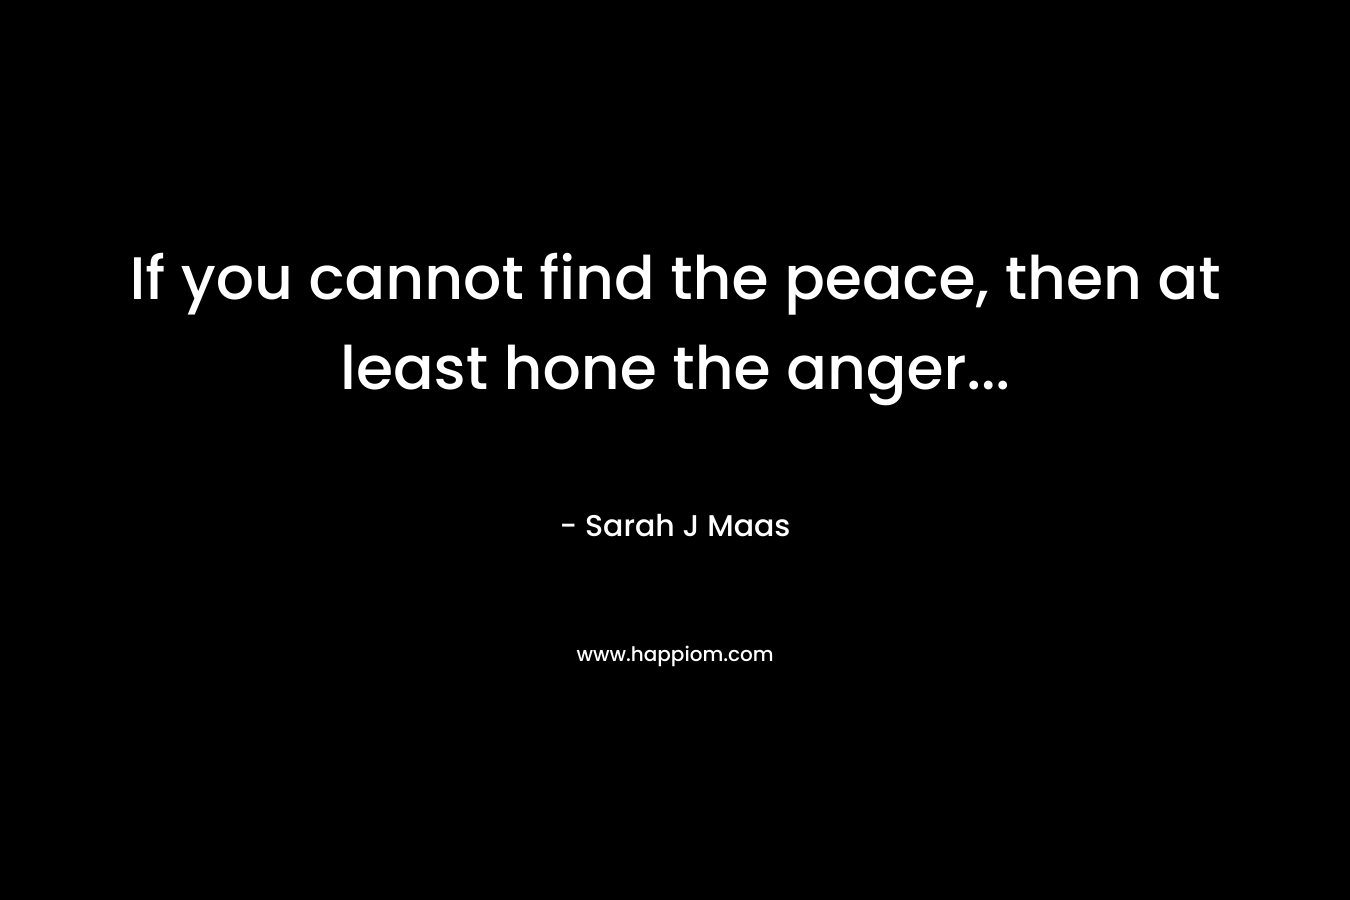 If you cannot find the peace, then at least hone the anger...